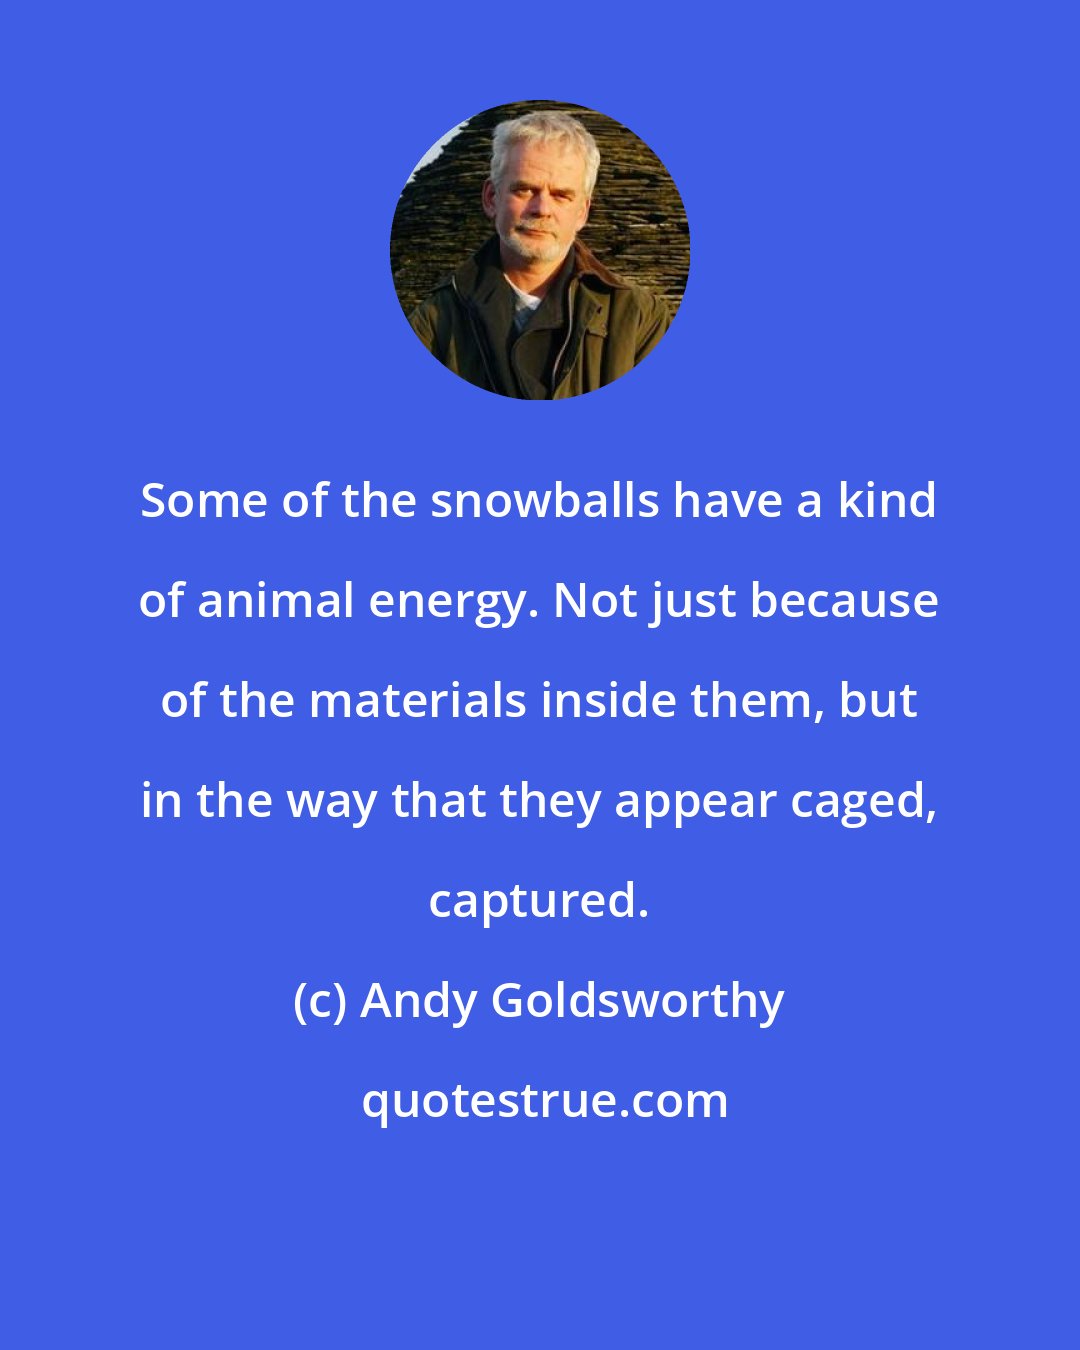 Andy Goldsworthy: Some of the snowballs have a kind of animal energy. Not just because of the materials inside them, but in the way that they appear caged, captured.